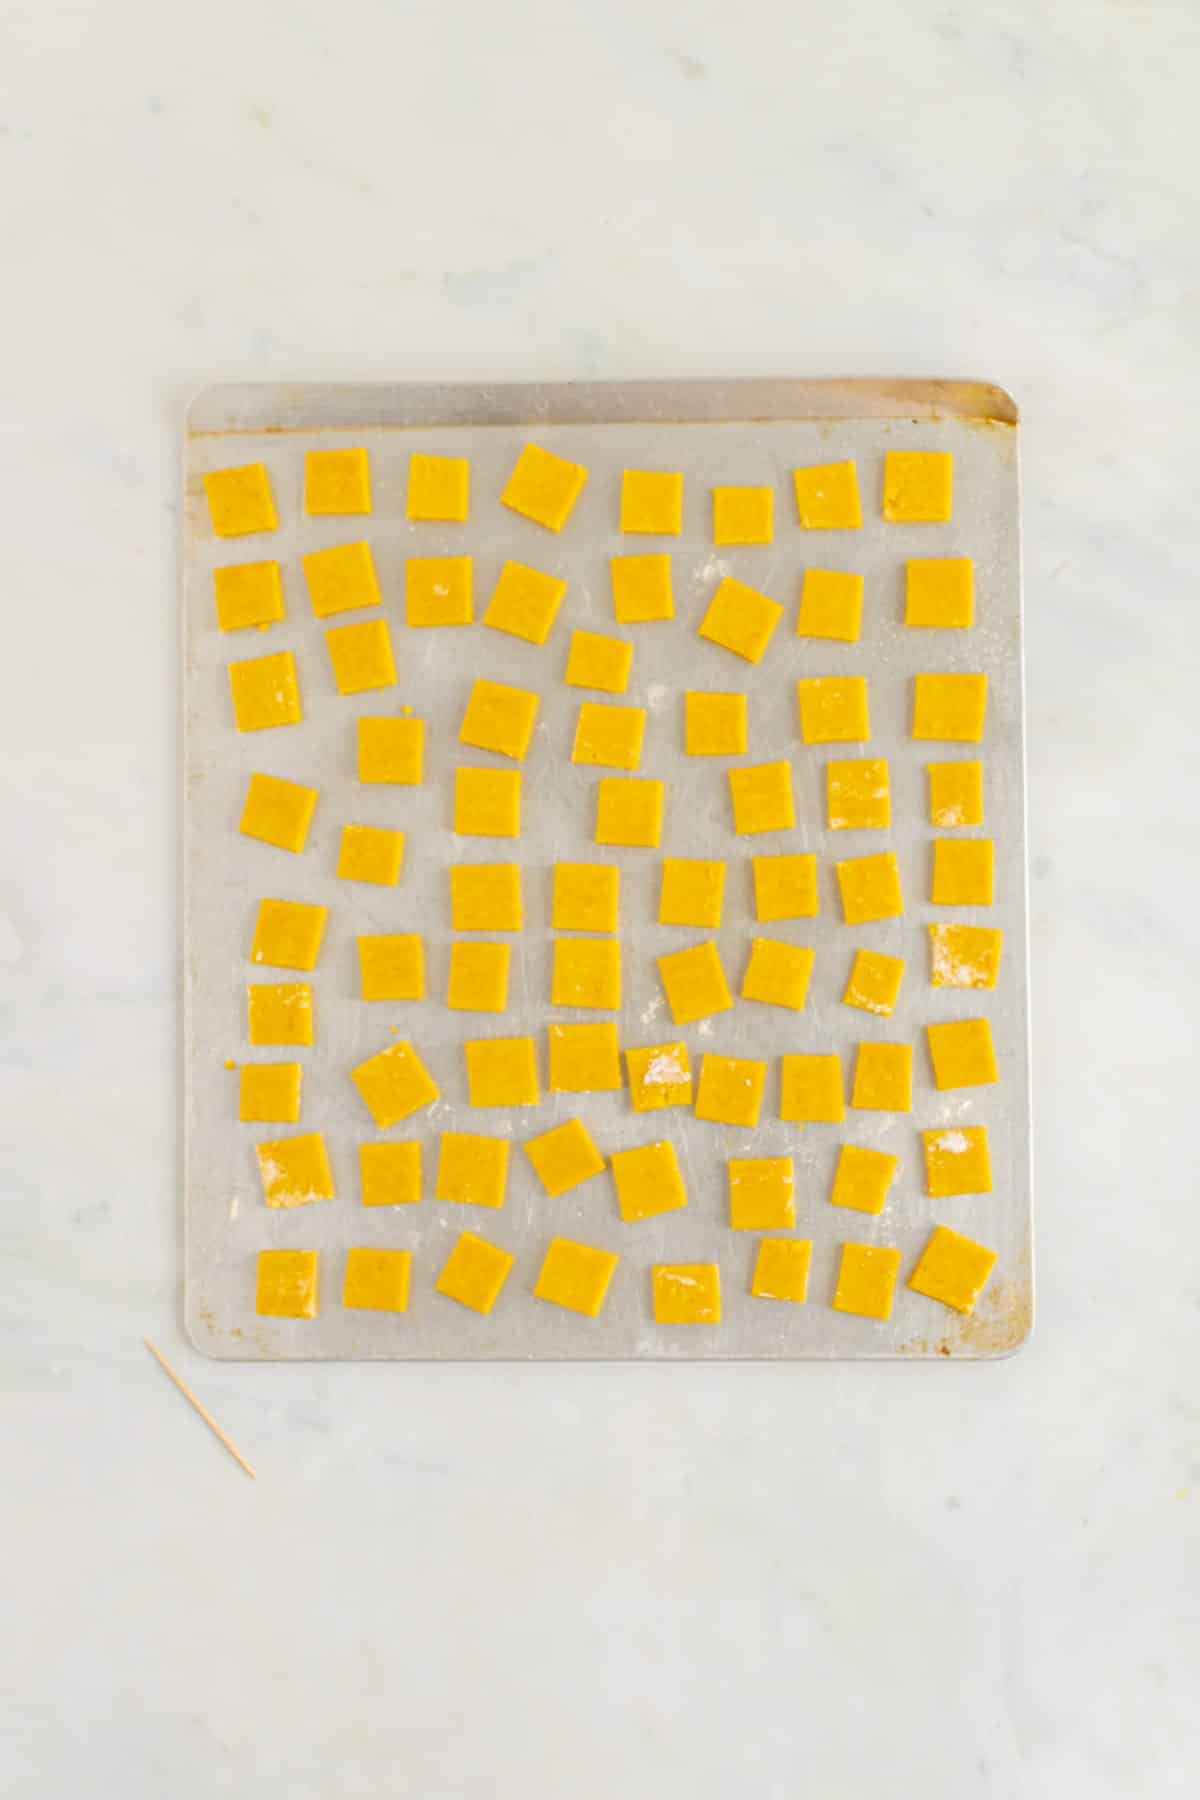 Cheez-Its on a baking sheet ready for the oven. 